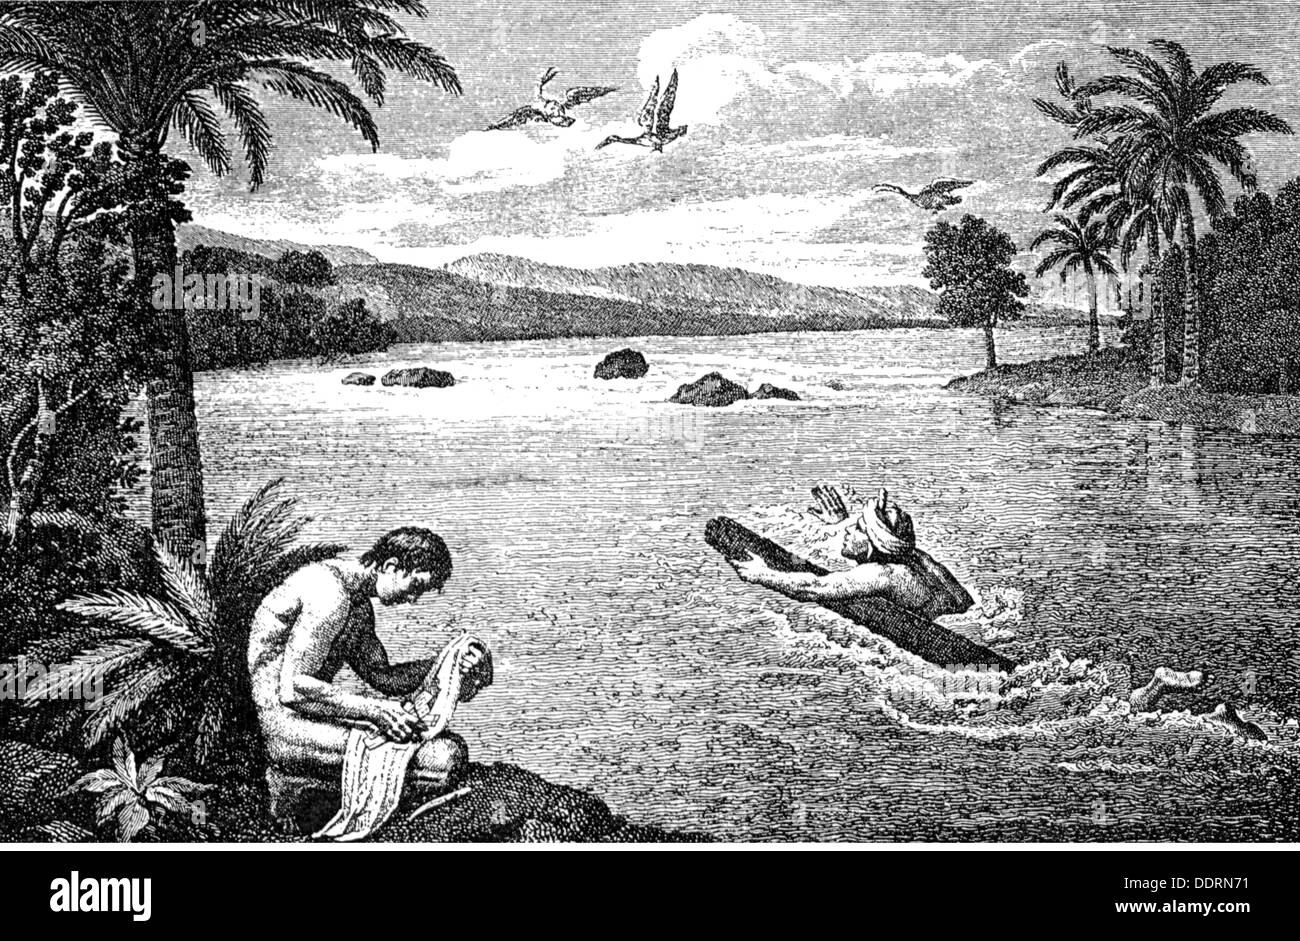 mail / post,postmen,swimming postmen,Peru,wood engraving,19th century,19th century,graphic,graphics,South America,messenger,intelligencer,couriers,messengers,intelligencers,by courier,half length,stretch of waters,river,rivers,swimming,landscape,landscapes,sitting,sit,pack,packing,package,packaging,waterproof,water-resistant,letter,letters,news,communication,communications,native,natives,indigenous people,local,locals,oddities,oddity,curiosity,curiosities,mail,post,postman,mailman,postmen,mailmen,historic,hist,Additional-Rights-Clearences-Not Available Stock Photo